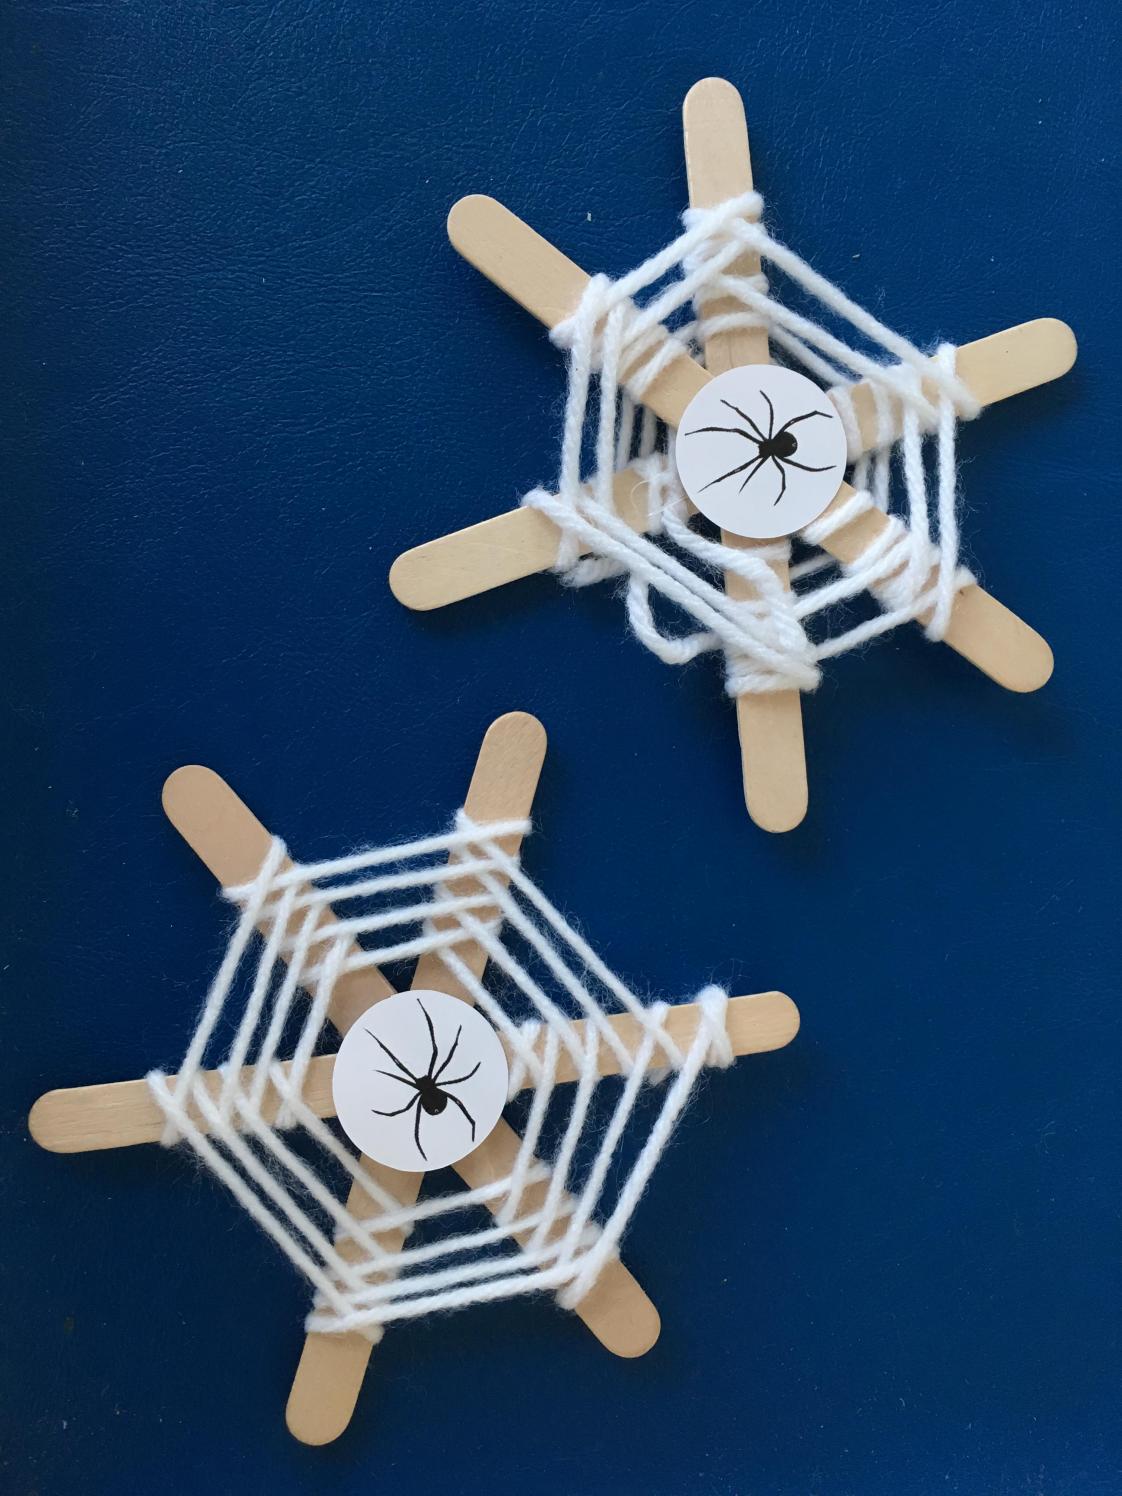 Spider web craft made with popsicle sticks